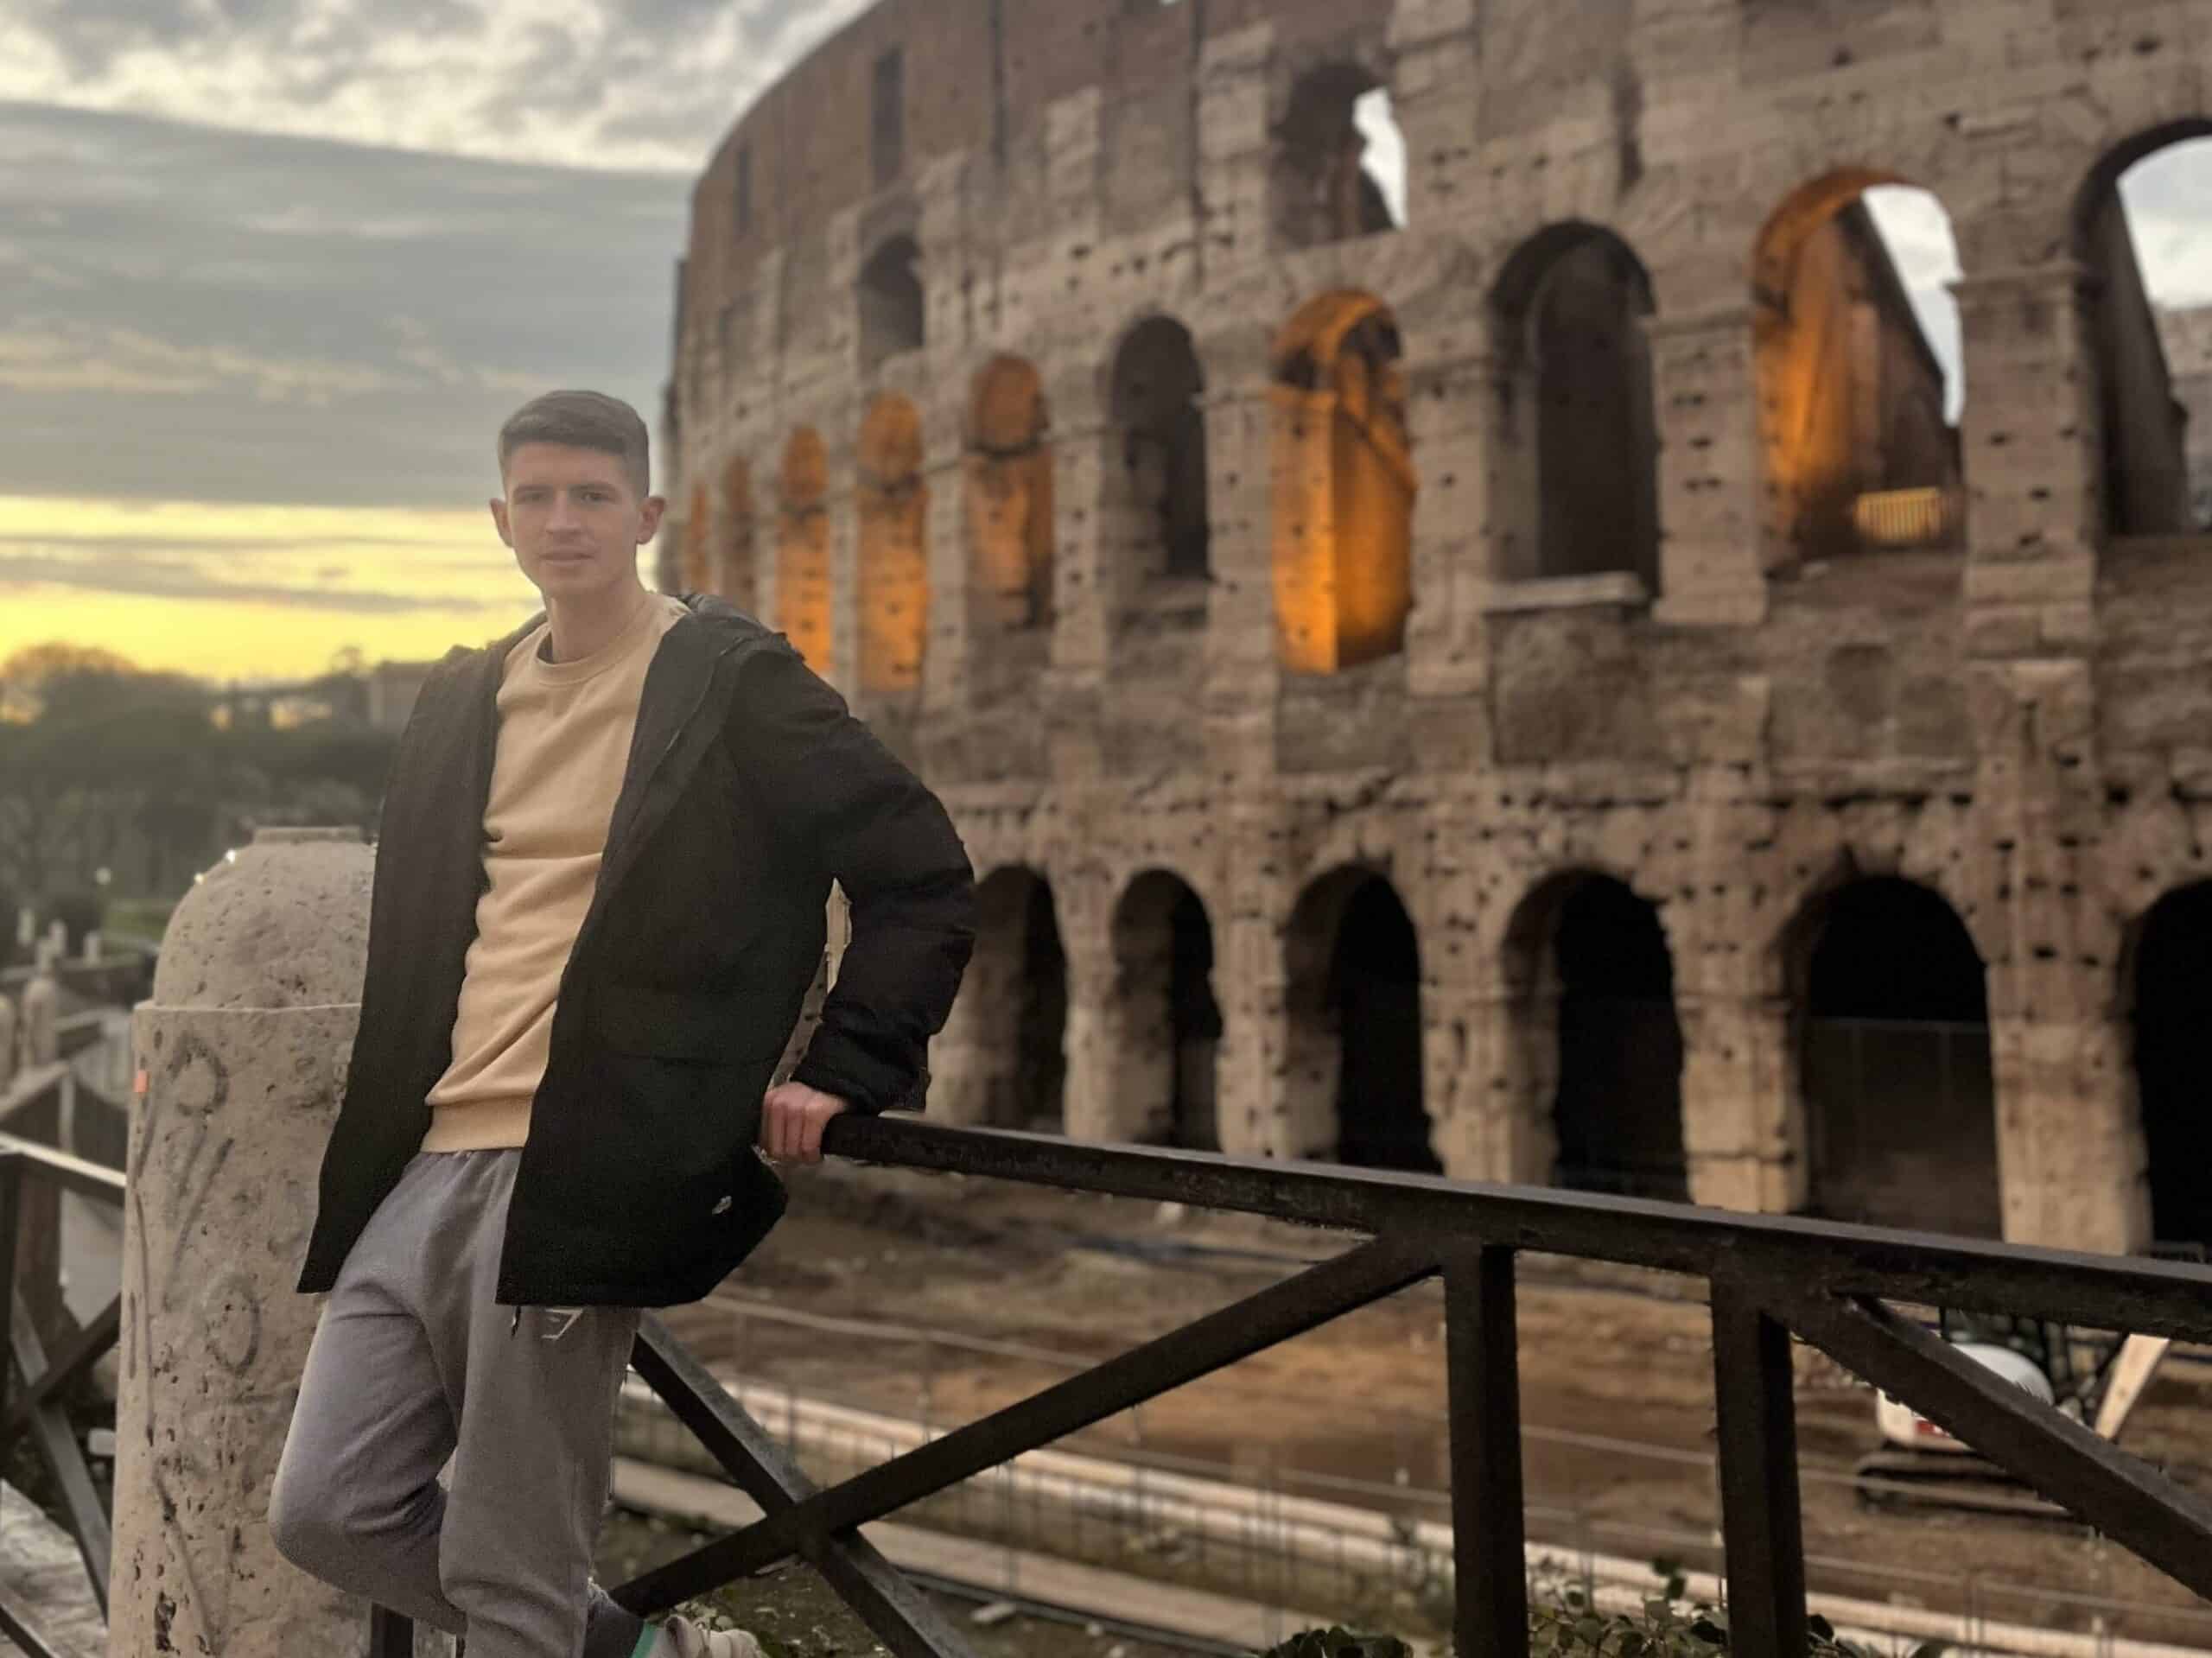 A picture of me outside the Colosseum at sunset.